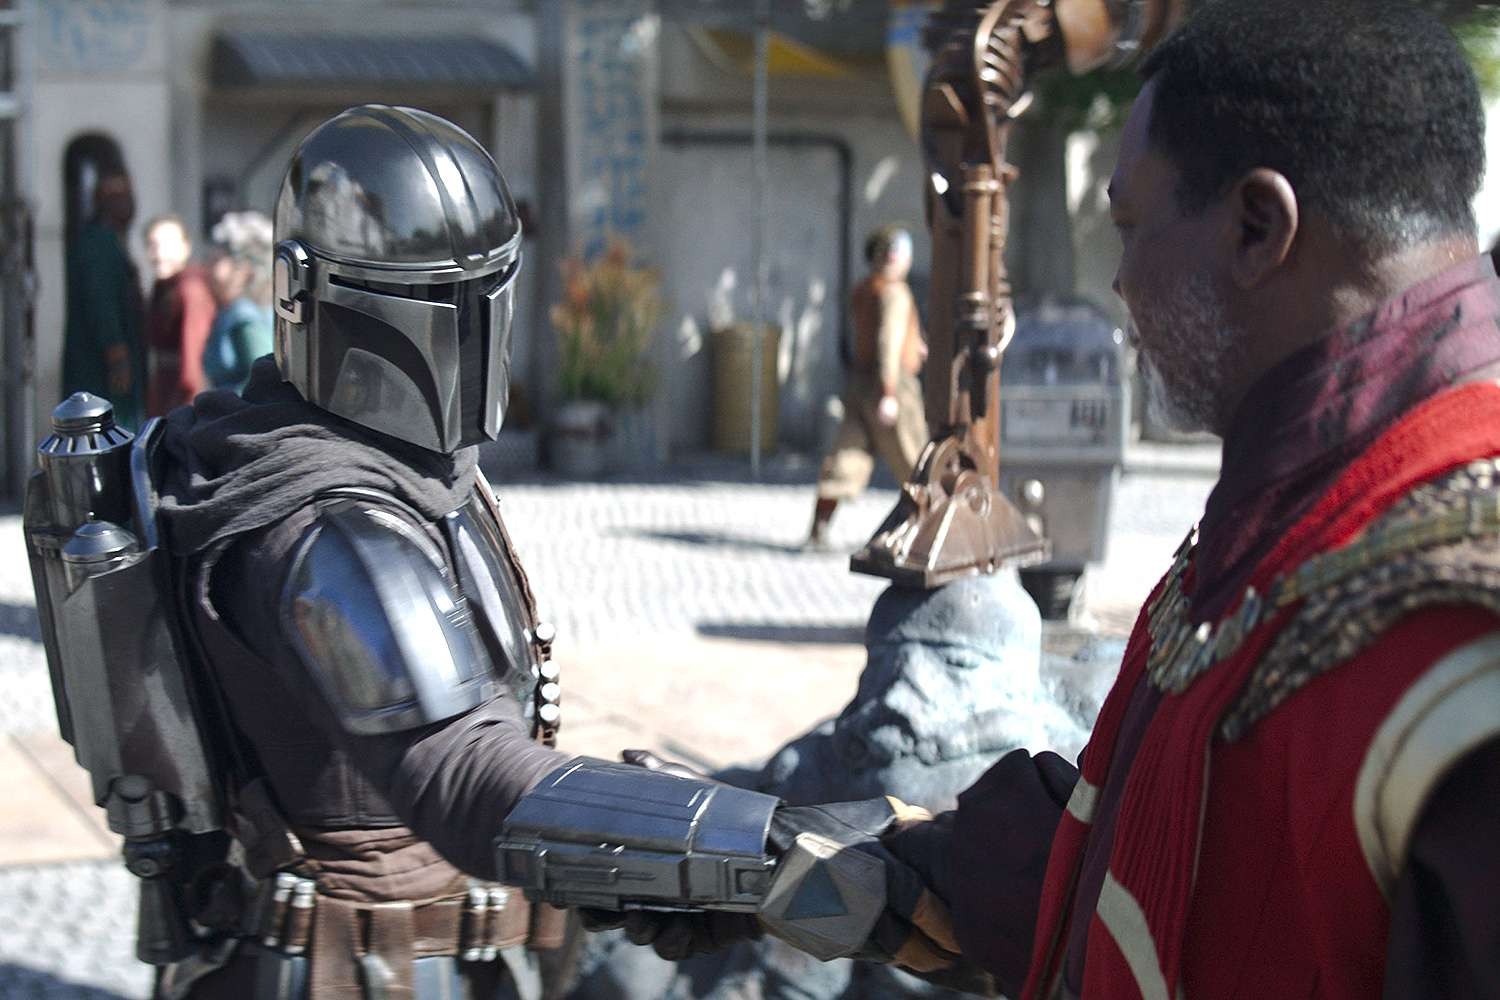 The Mandalorian season 3 has been delayed—but only a little